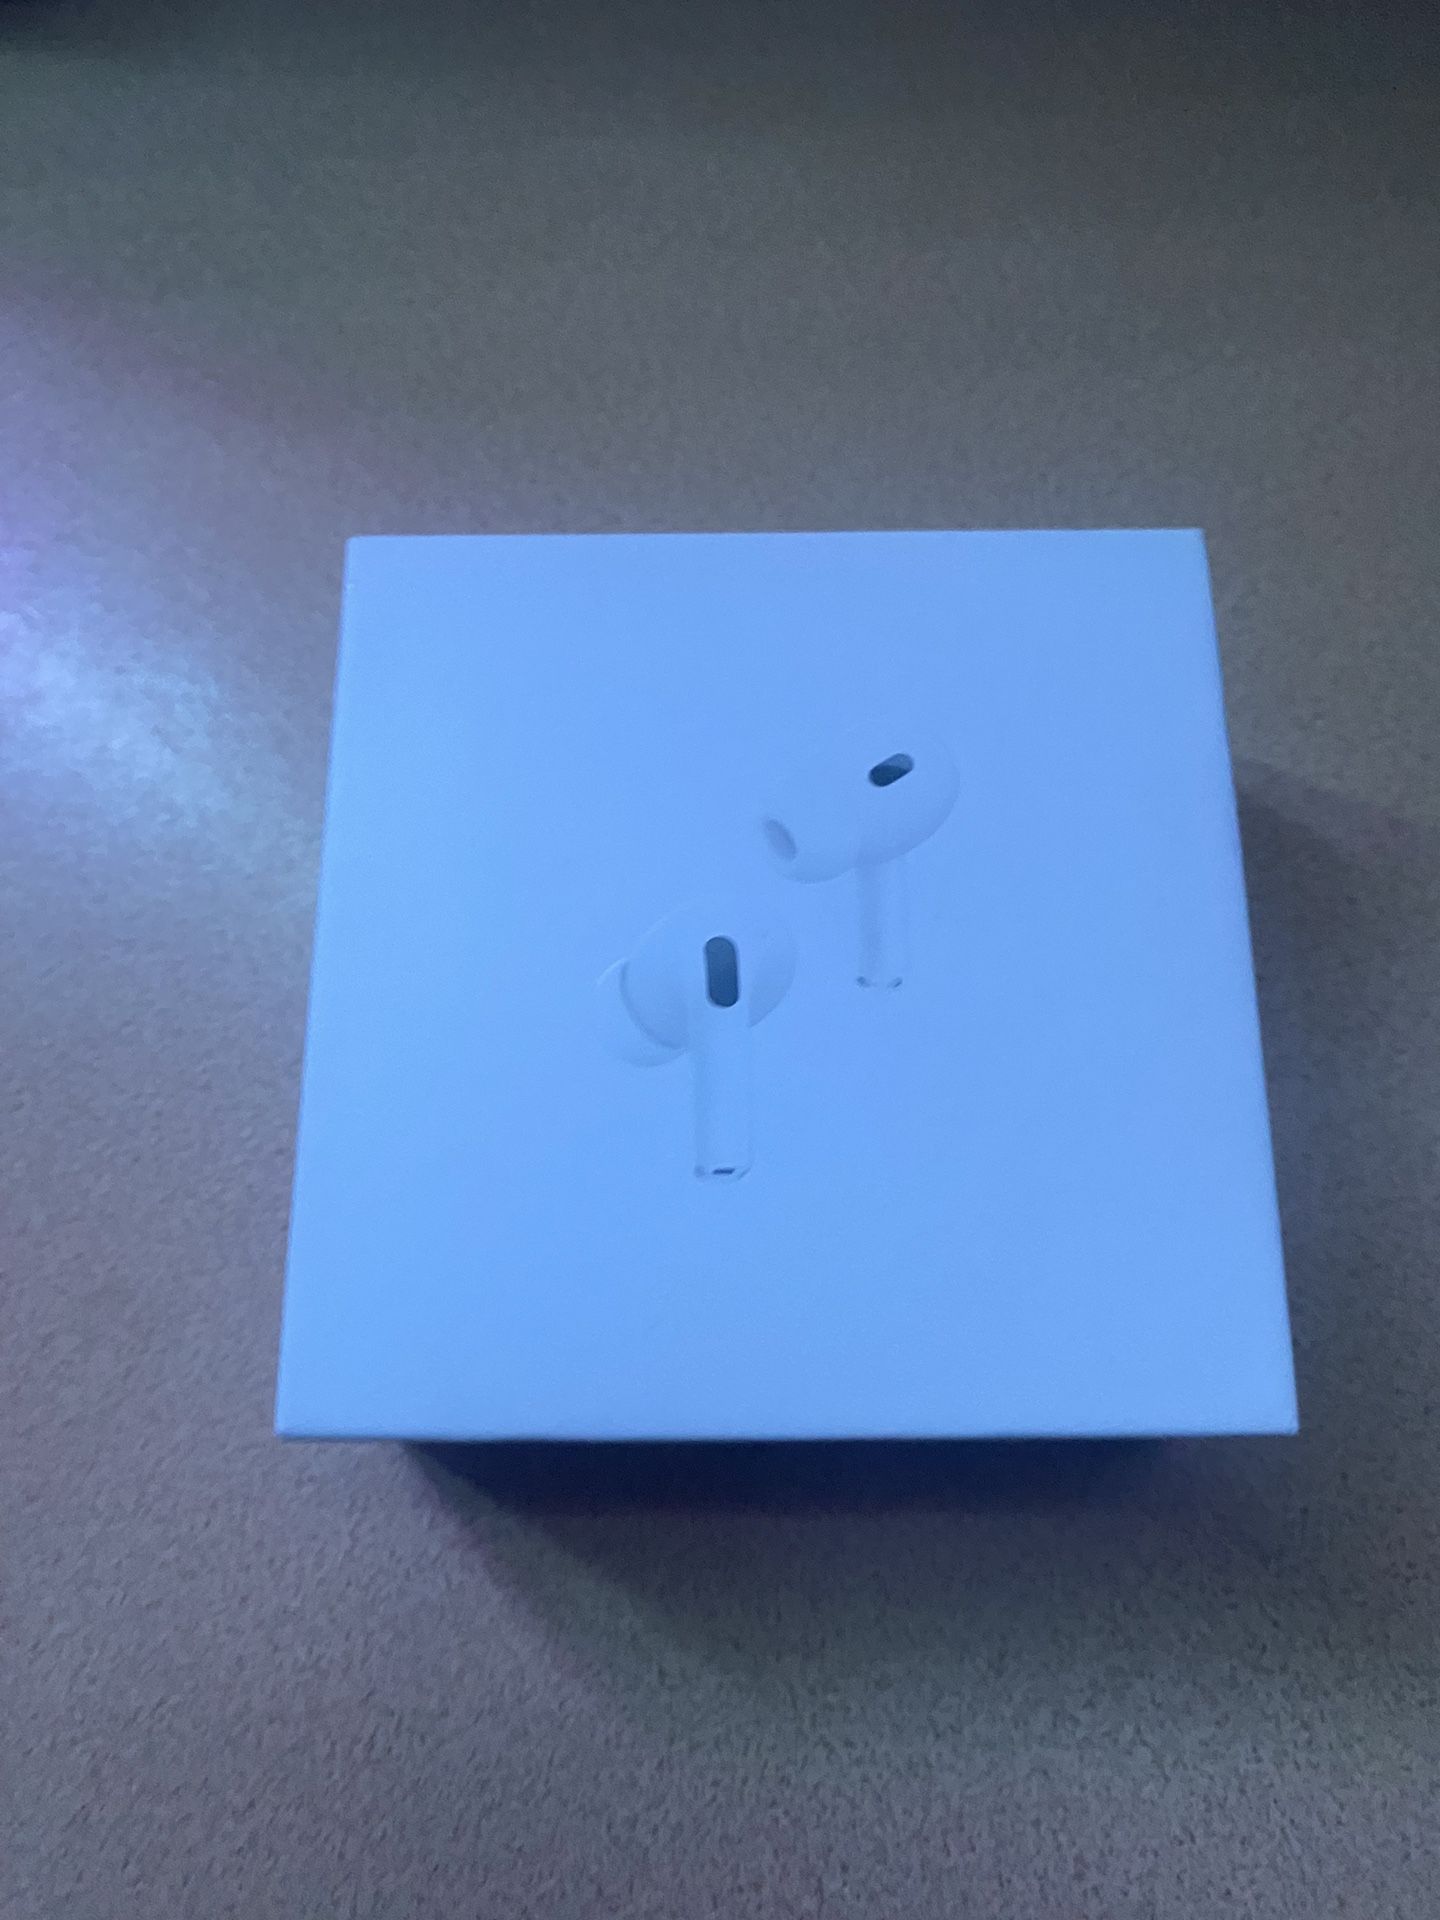 AirPods Pro Second generation 